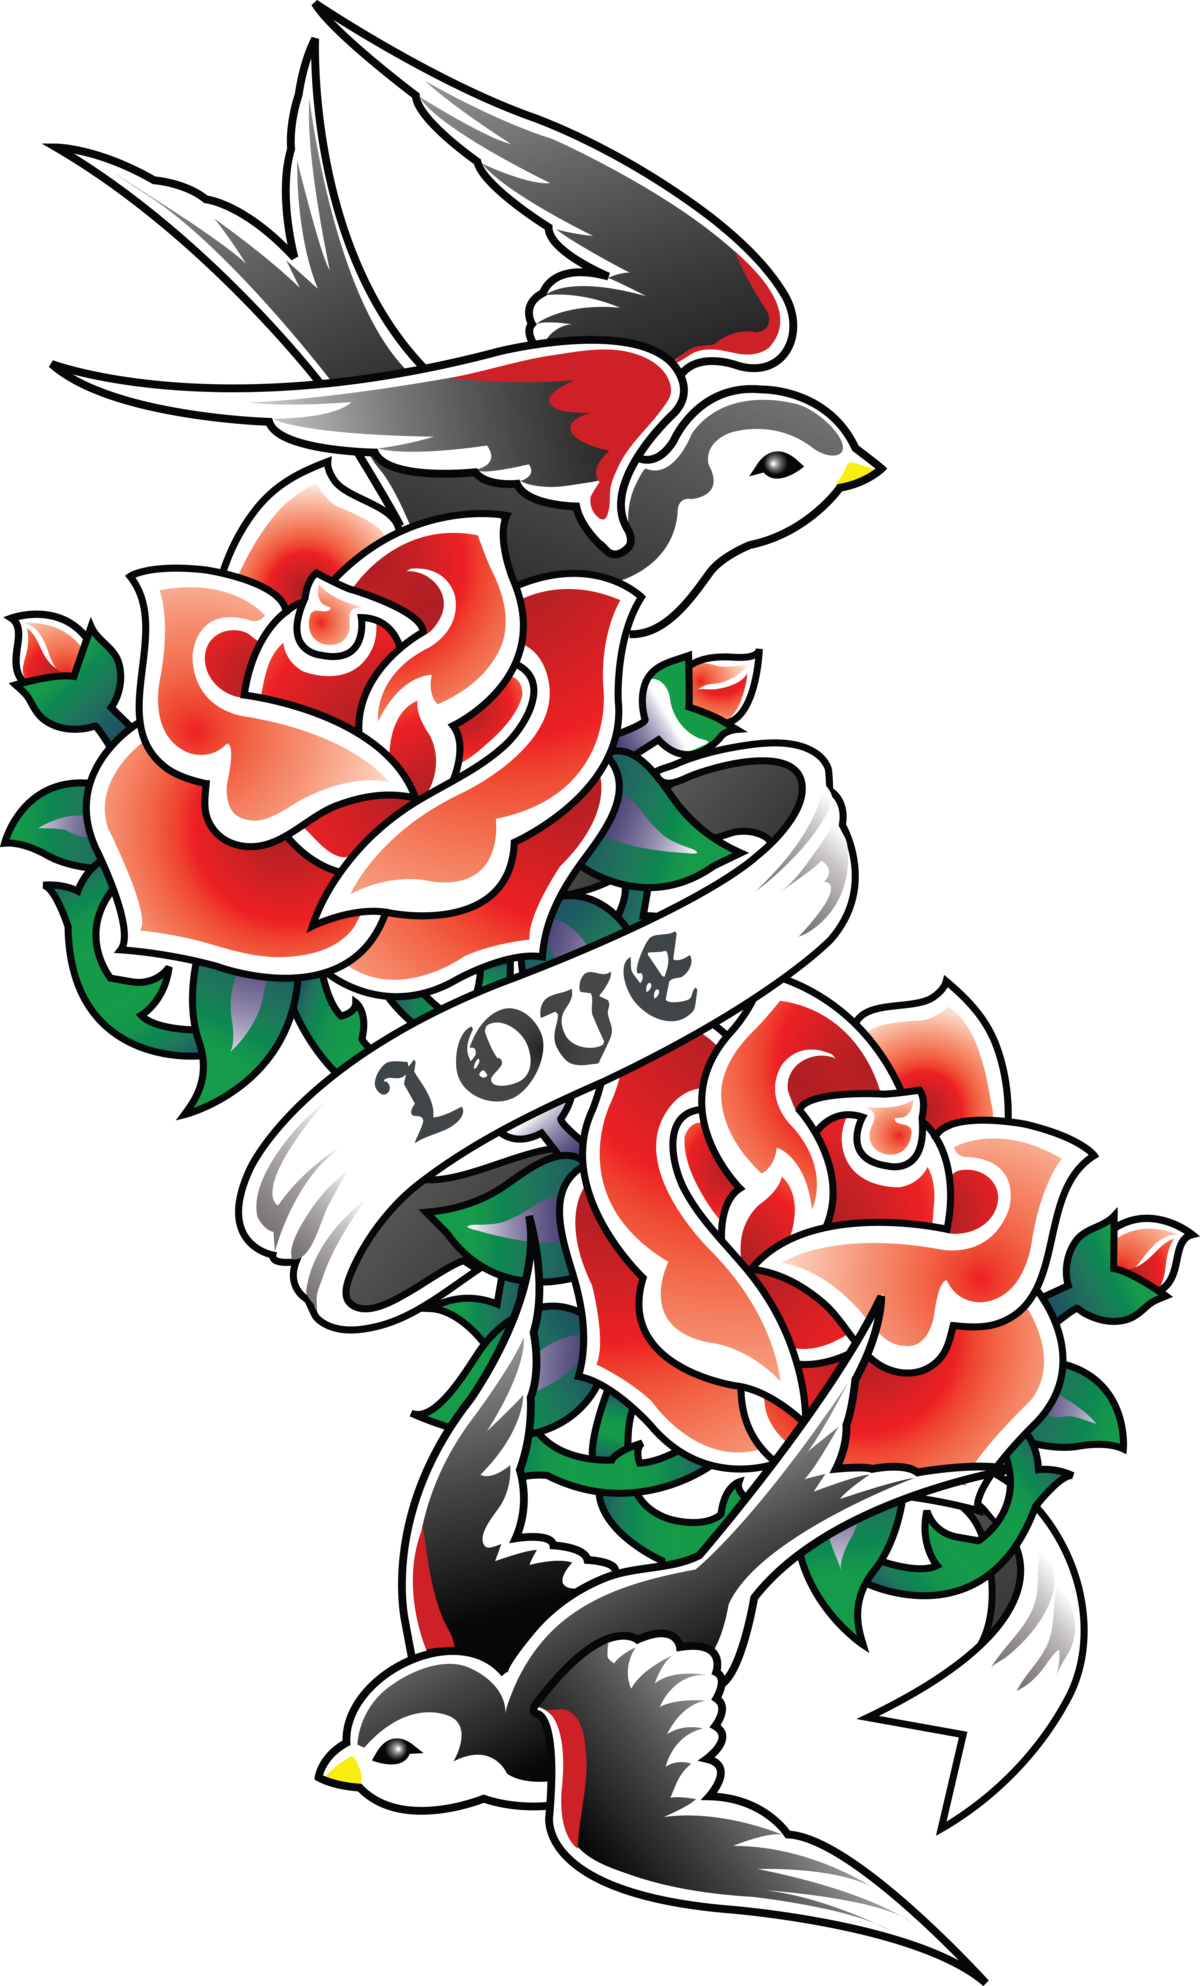 Tattoo School Old Sleeve Rose (Tattoo) Swallow PNG Image